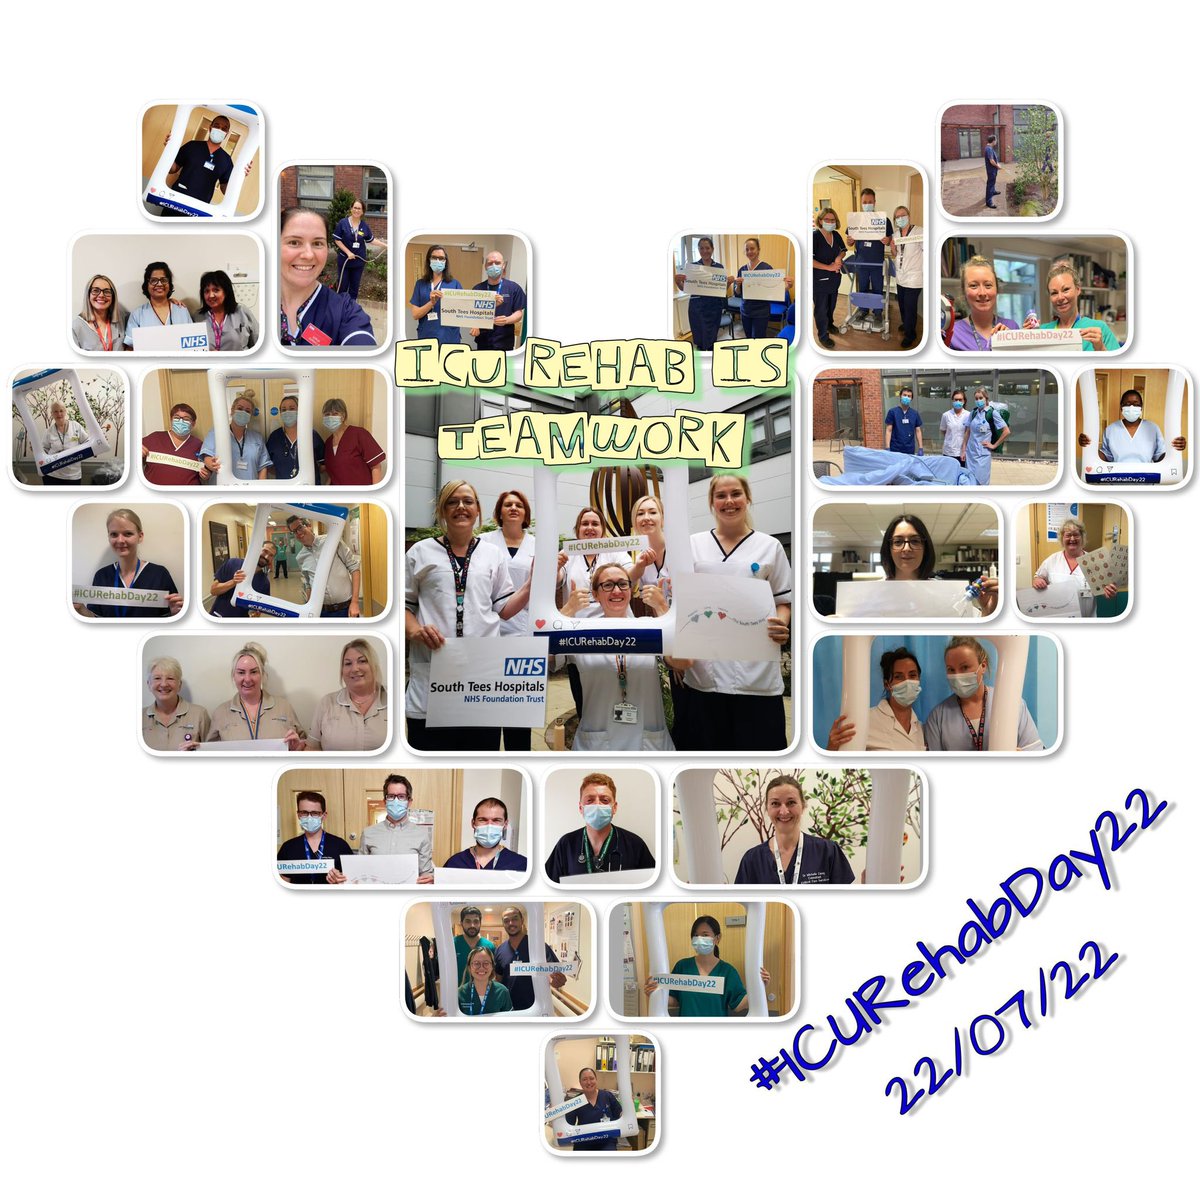 “You’re the best” #intergratedcare is essential for quality pt focus care! Everyone counts, Everyone has a role to play, Everyone makes a difference! Happy #ICUrehabday22 to the amazing critical care MDT @SouthTees #Rehabiscritical #rehablegends @ICUsteps @jessandzz @TantamKate